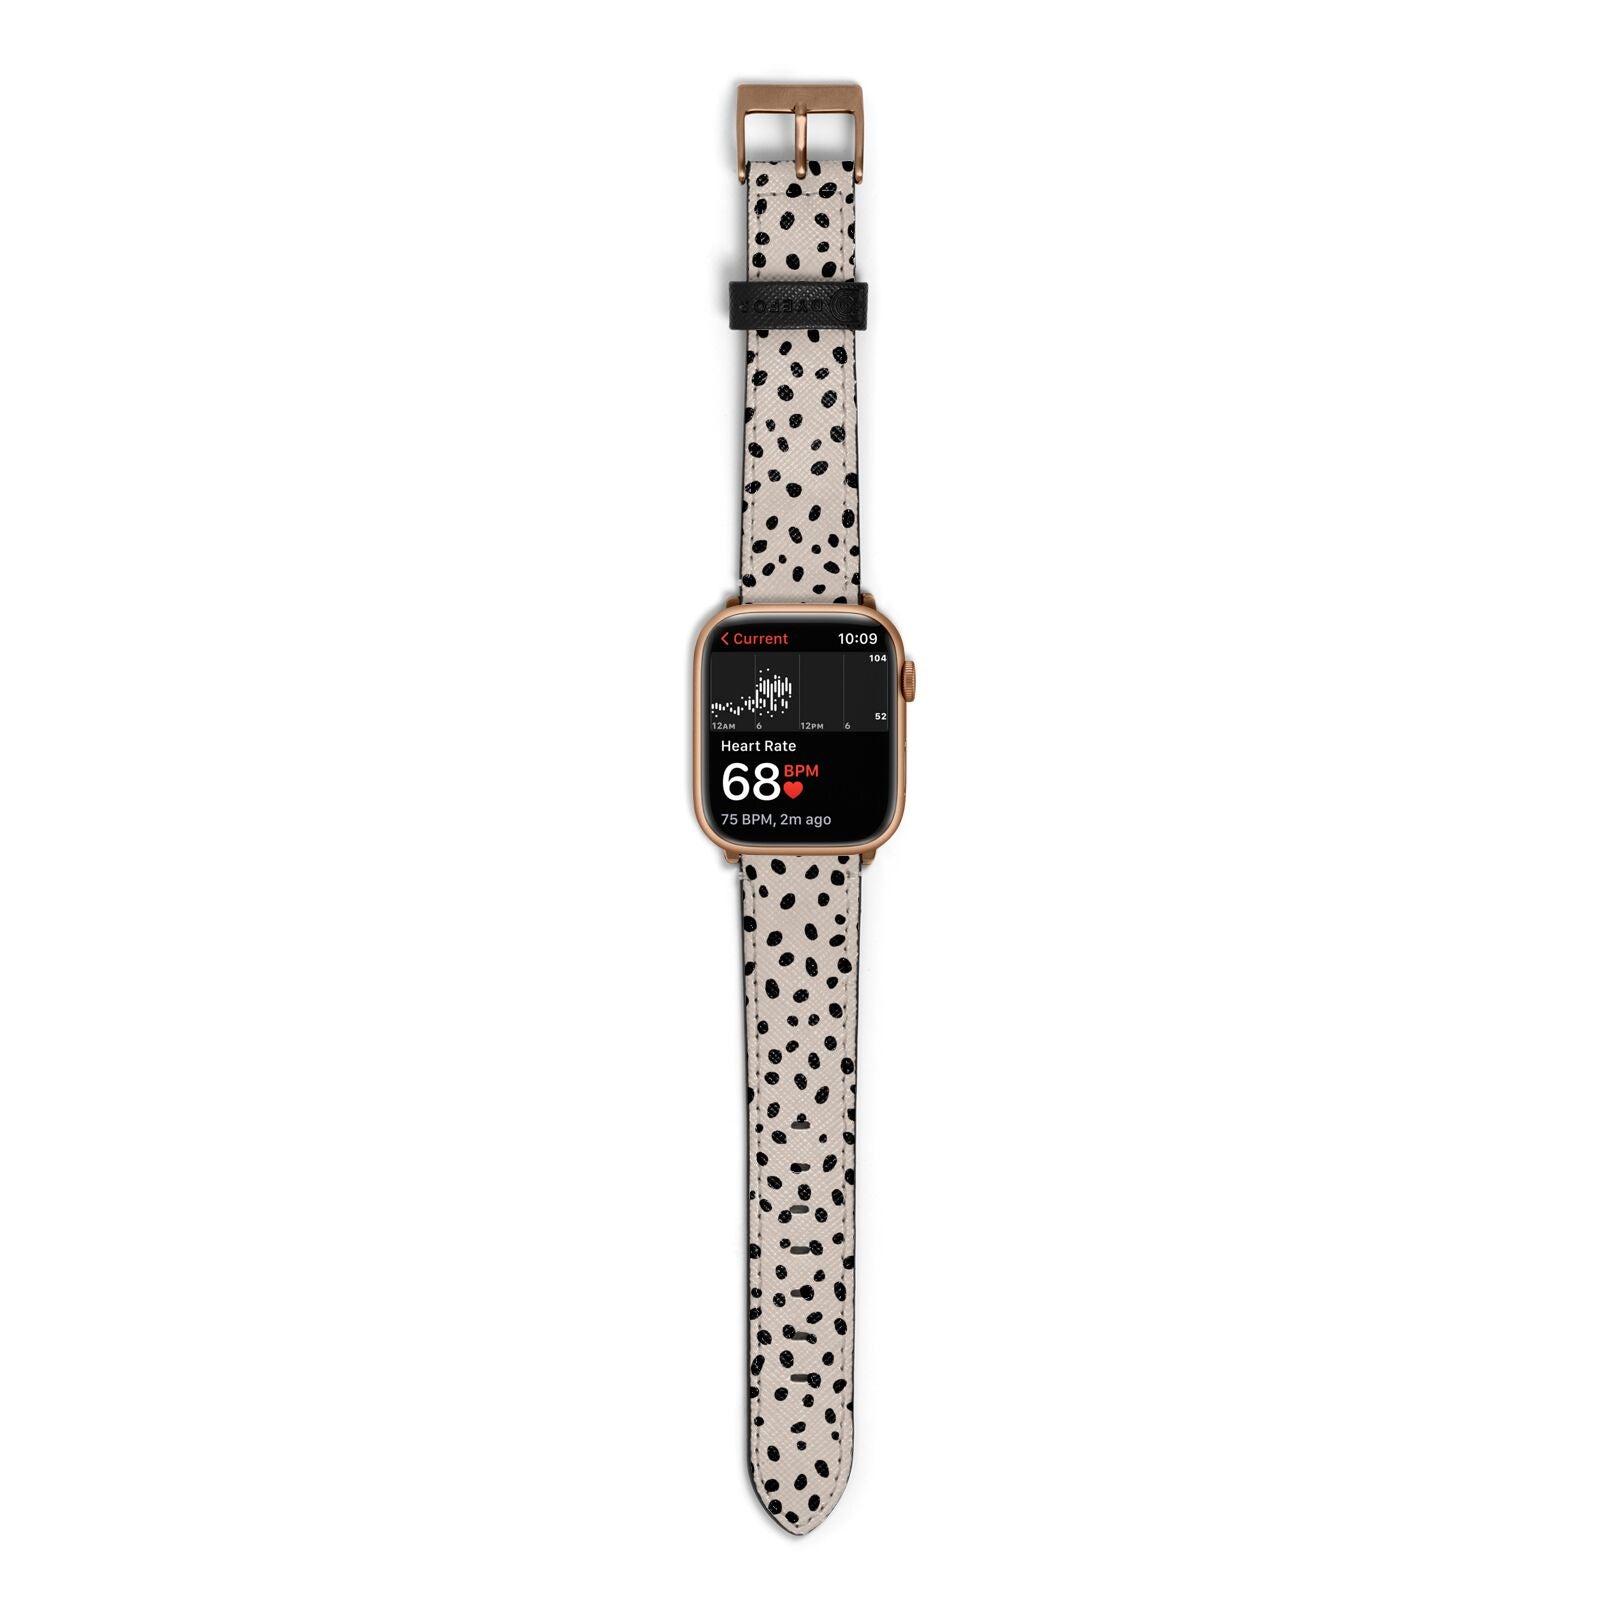 Almond Polka Dot Apple Watch Strap Size 38mm with Gold Hardware